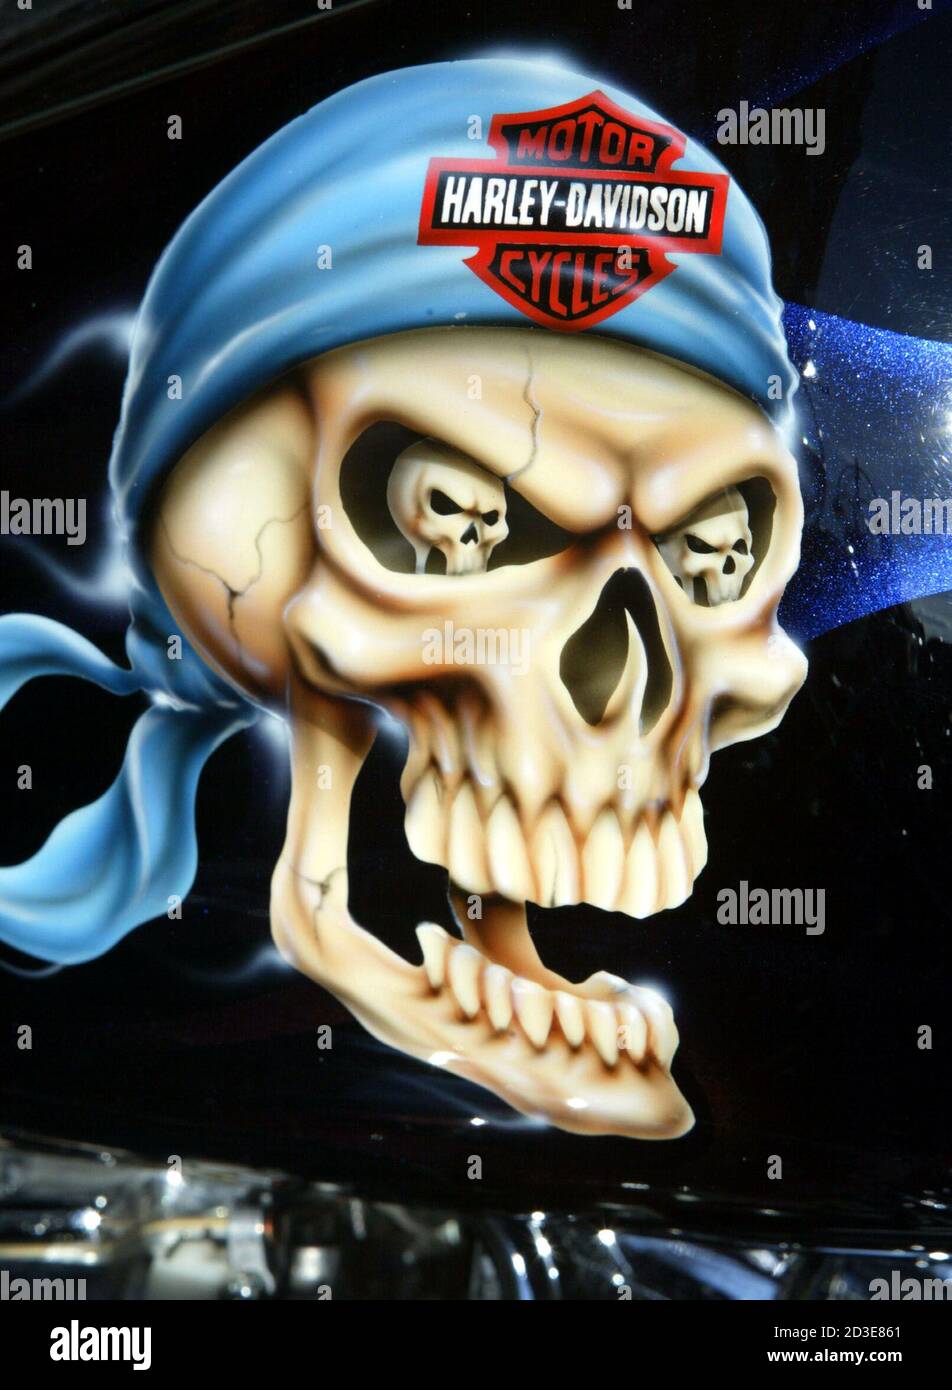 A skull graphic is painted on the gas tank of a Harley-Davidson motorcycle in downtown Milwaukee, August 30, 2003. The legendary American motorcycle company is celebrating its 100th anniversary. Stock Photo